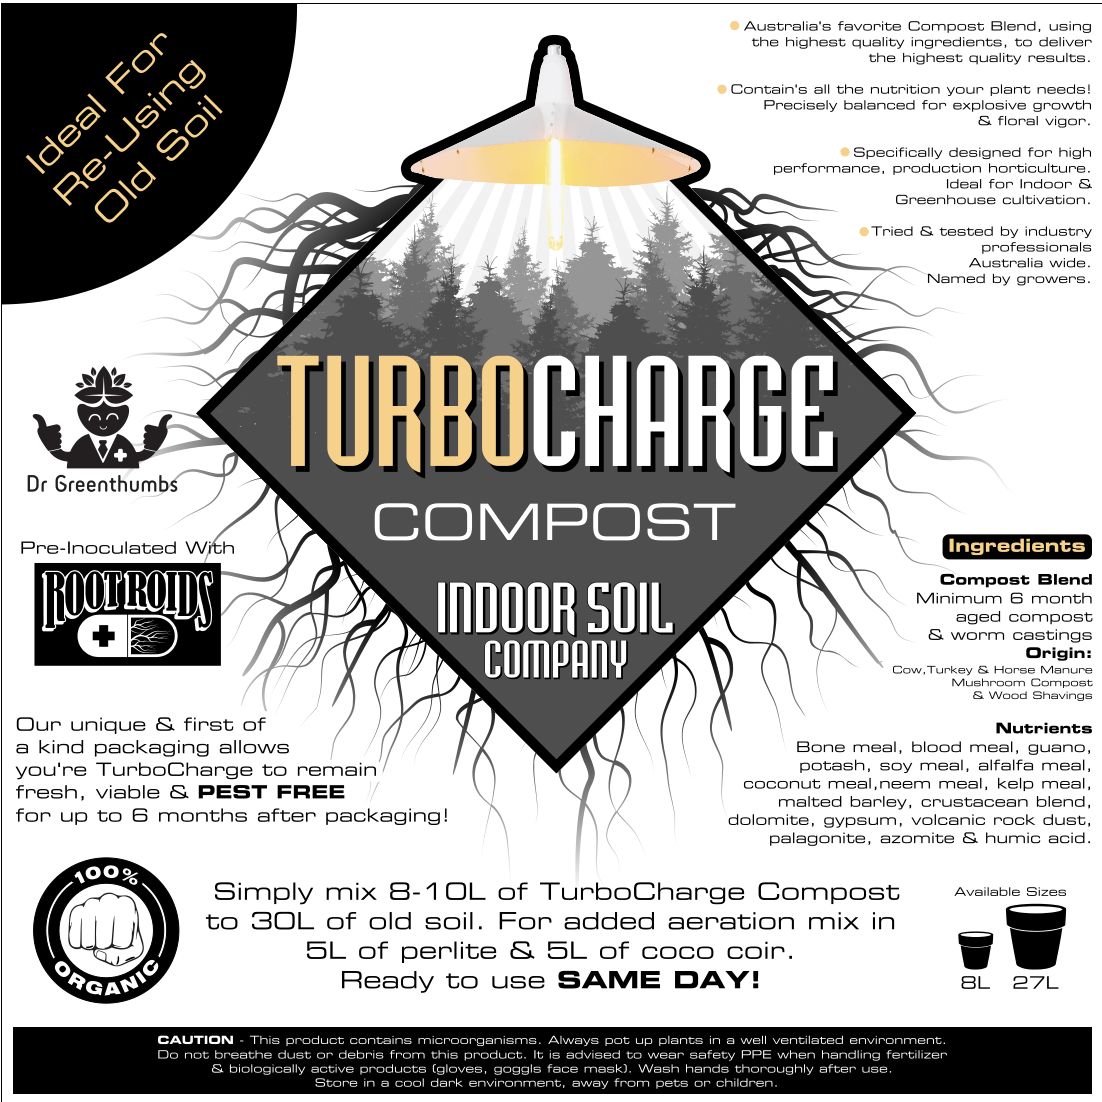 Dr Greenthumbs TurboCharge Compost